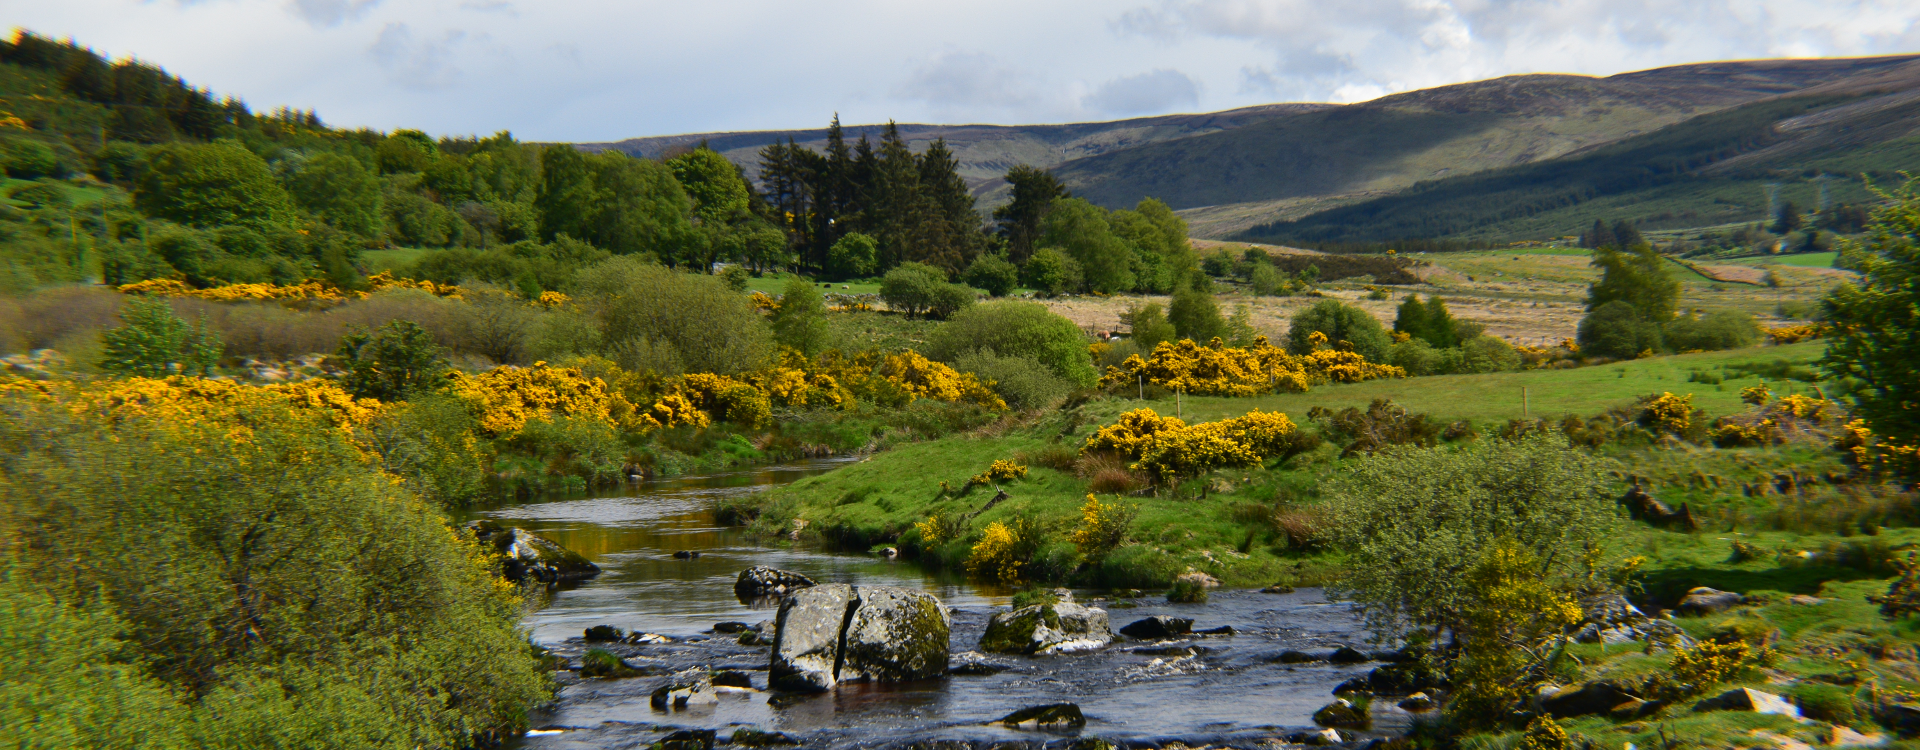 Glendalough with rocks and stream in foreground in addition to tress and yellow flowers in the background